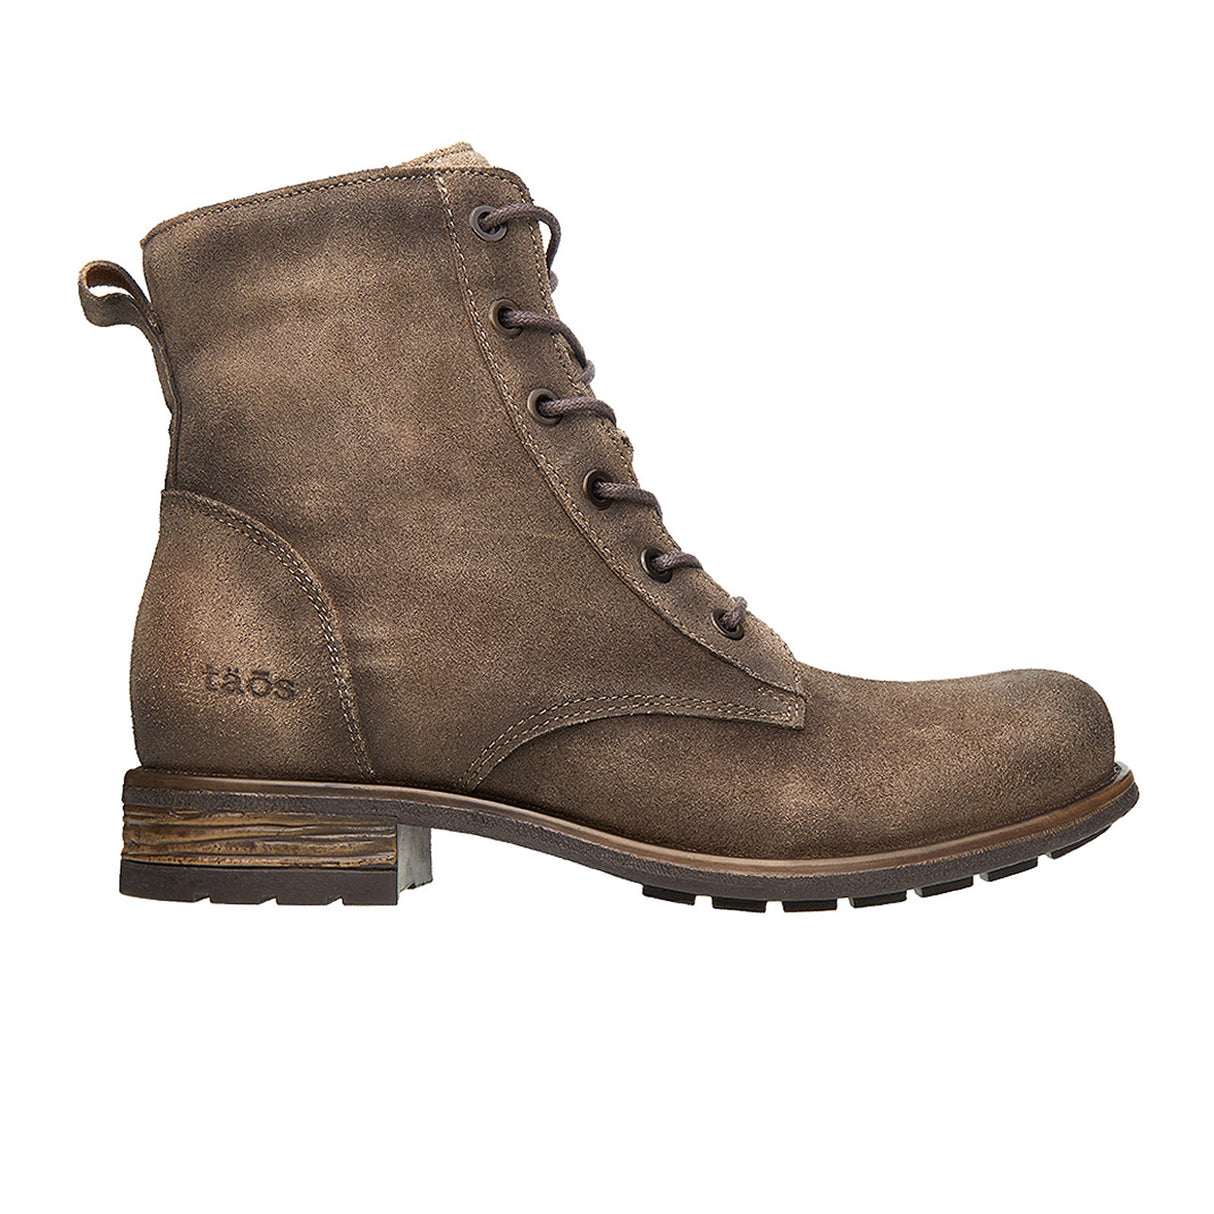 Taos Boot Camp Lace Up Mid Boot (Women) - Smoke Rugged Leather Boots - Casual - Mid - The Heel Shoe Fitters